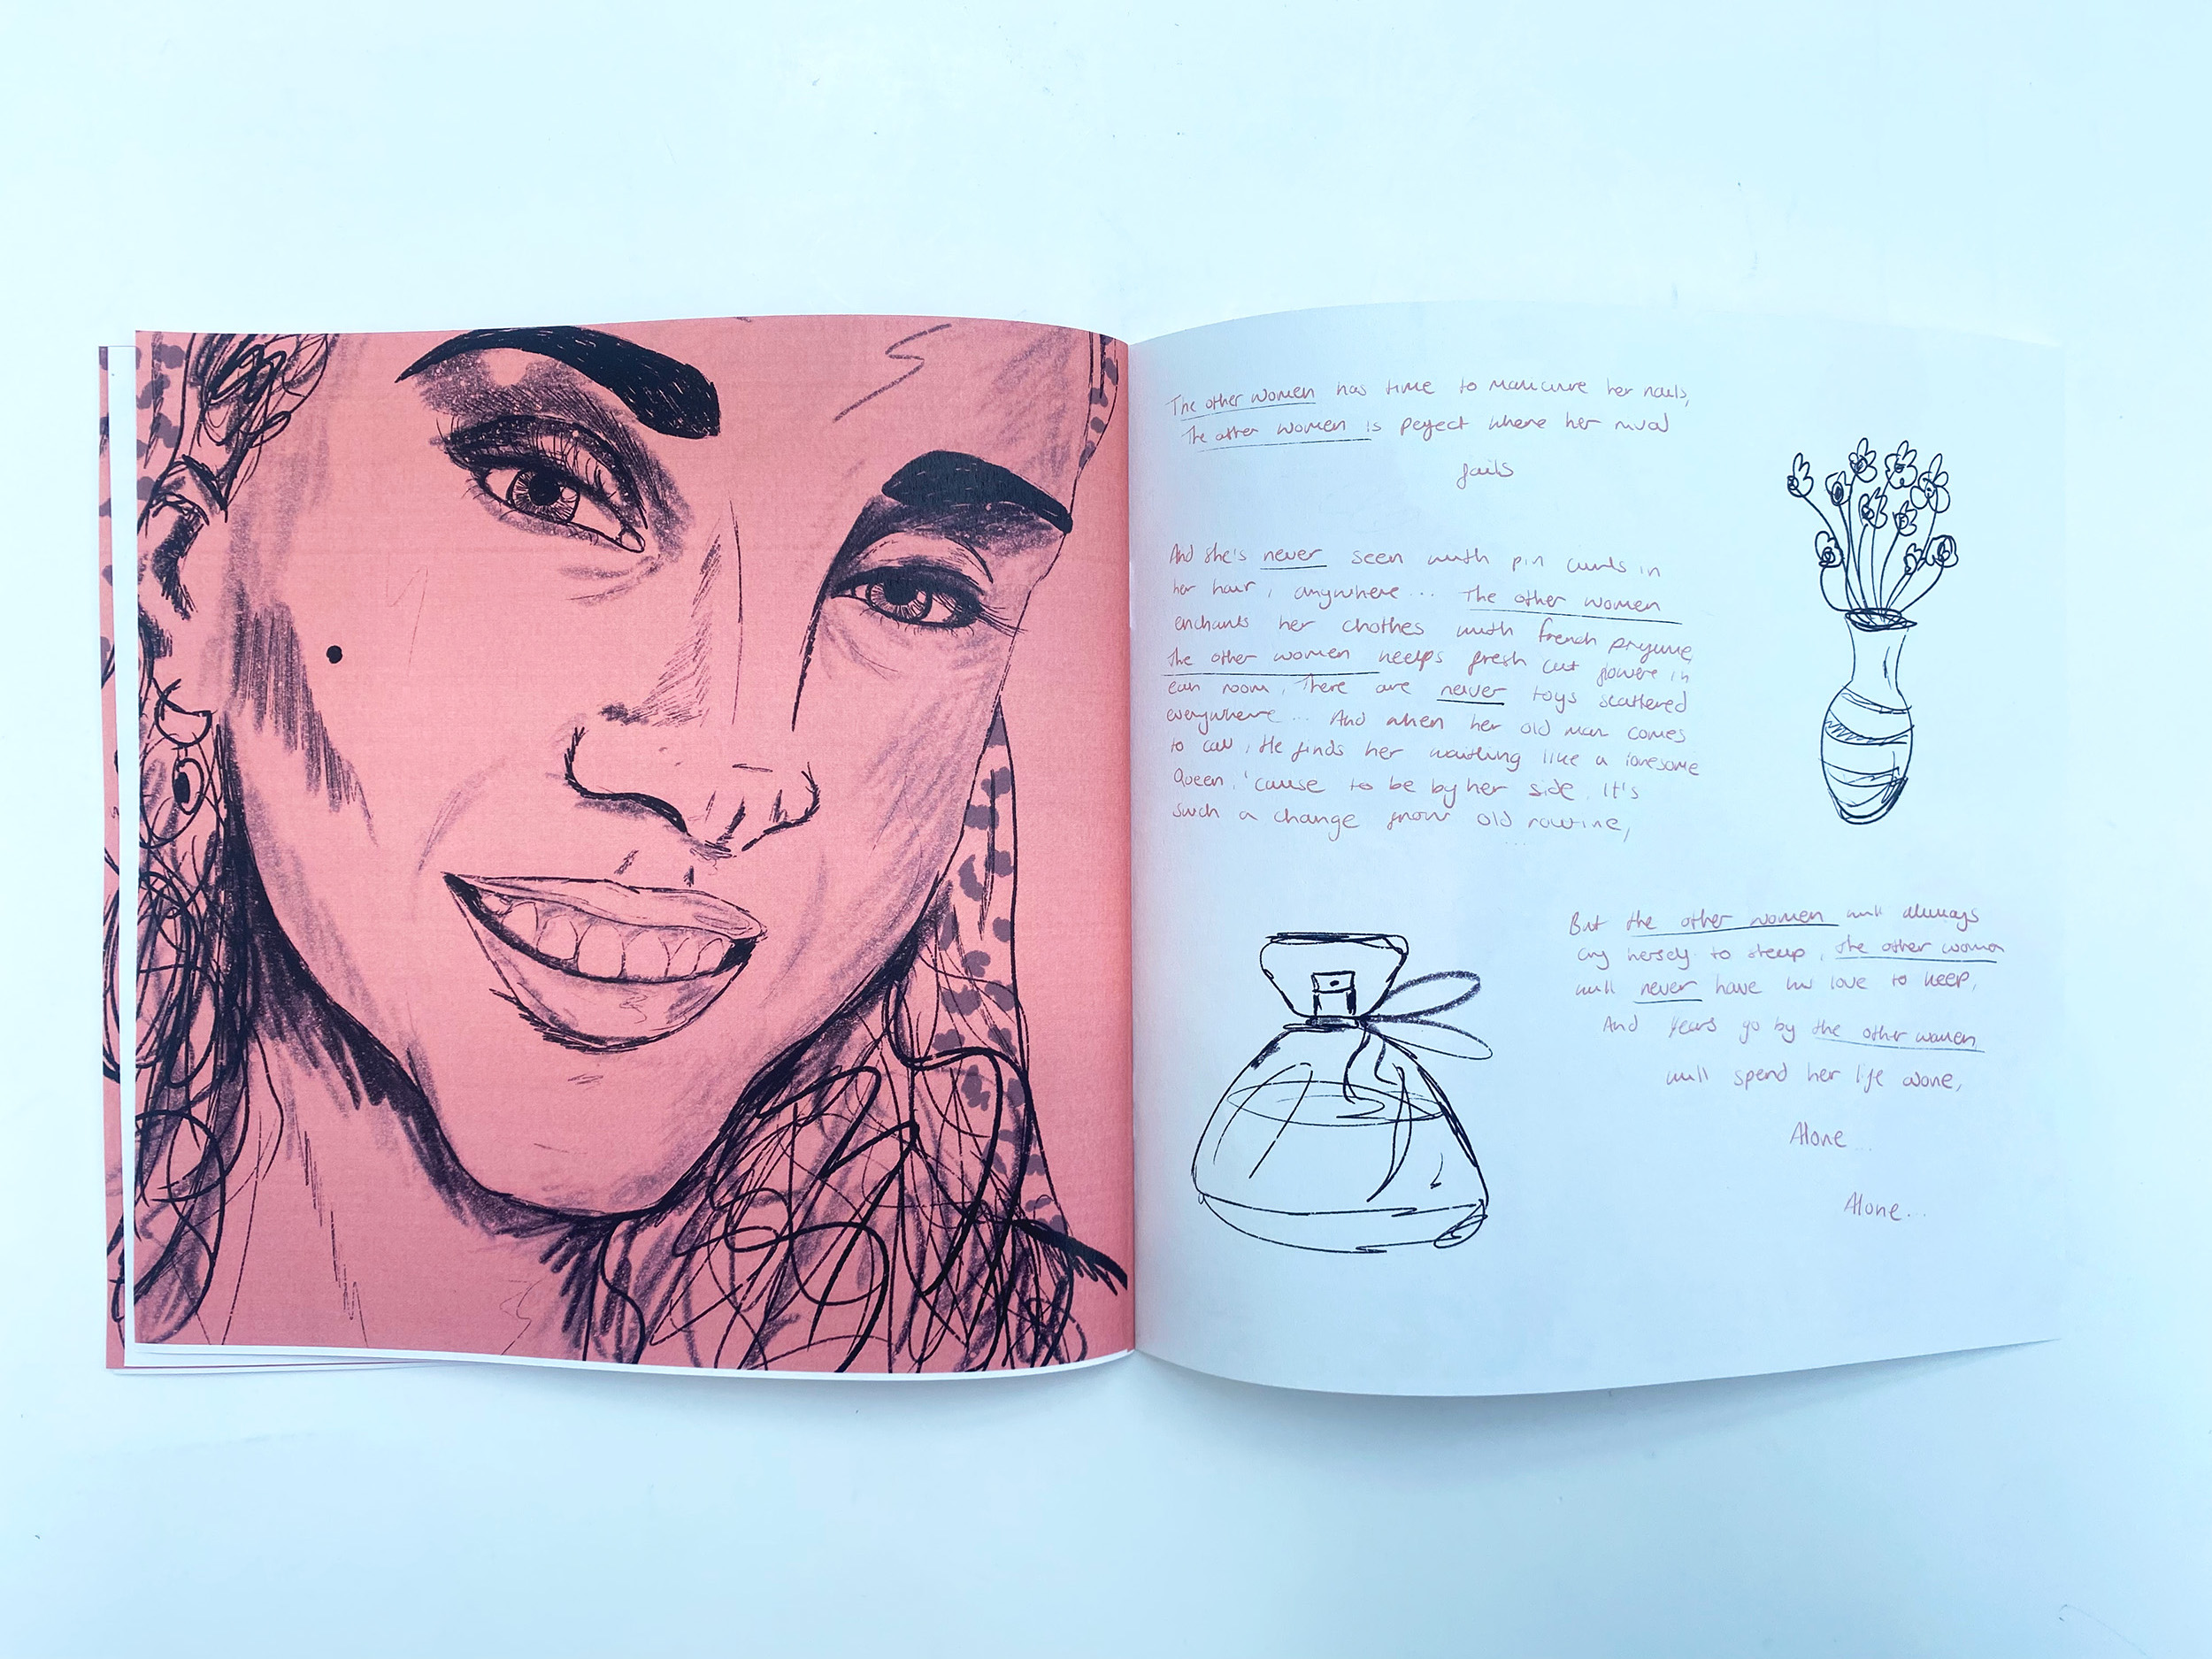 Illustrated and hand written lyric book by Caitlin Jennings from the Ultraviolence album (Lana Del Rey).